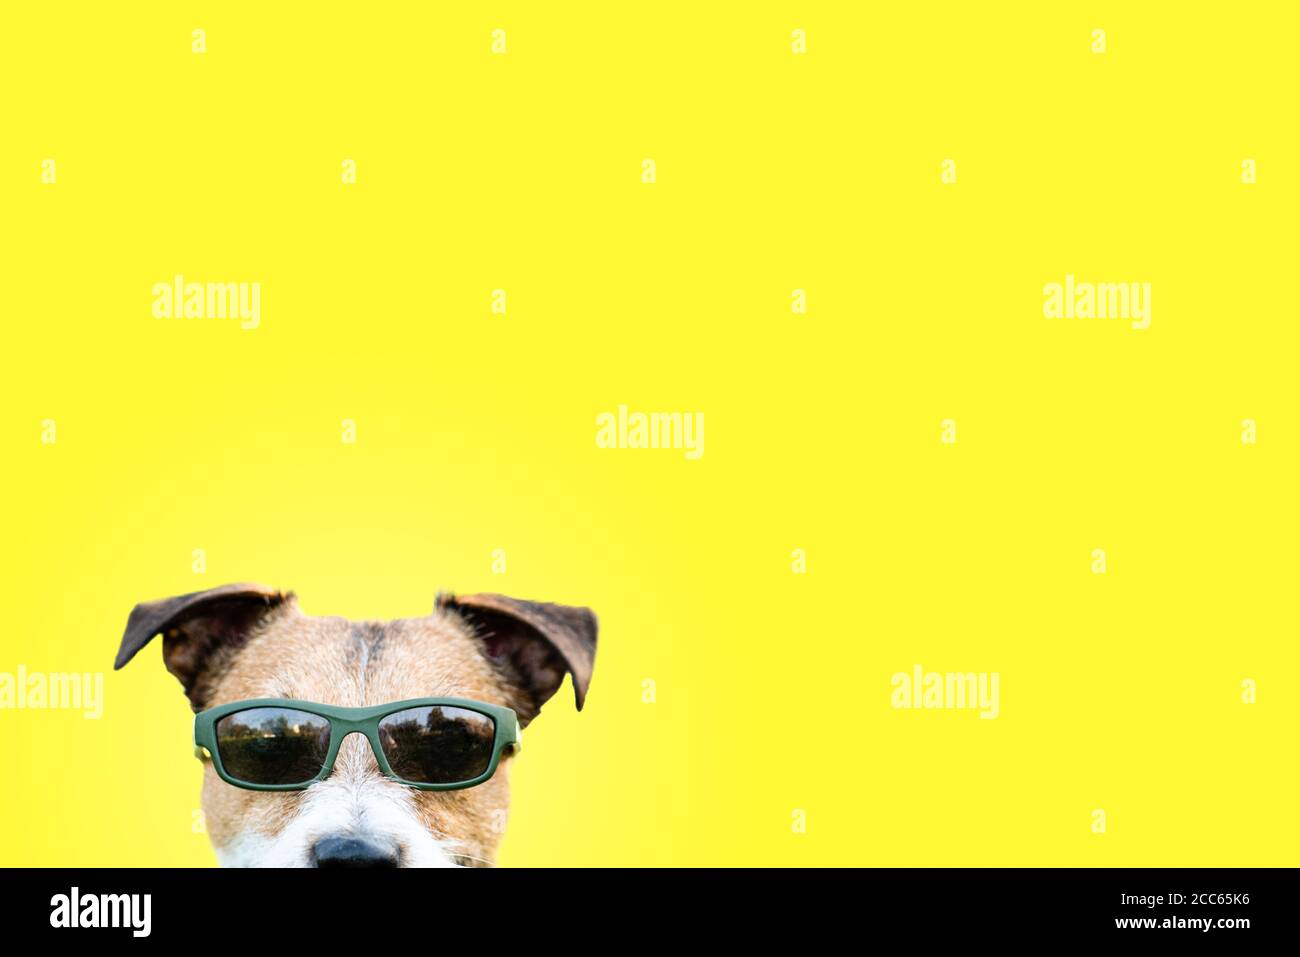 Humorous travel and tourism concept with funny dog wearing sunglasses against yellow solid color background Stock Photo